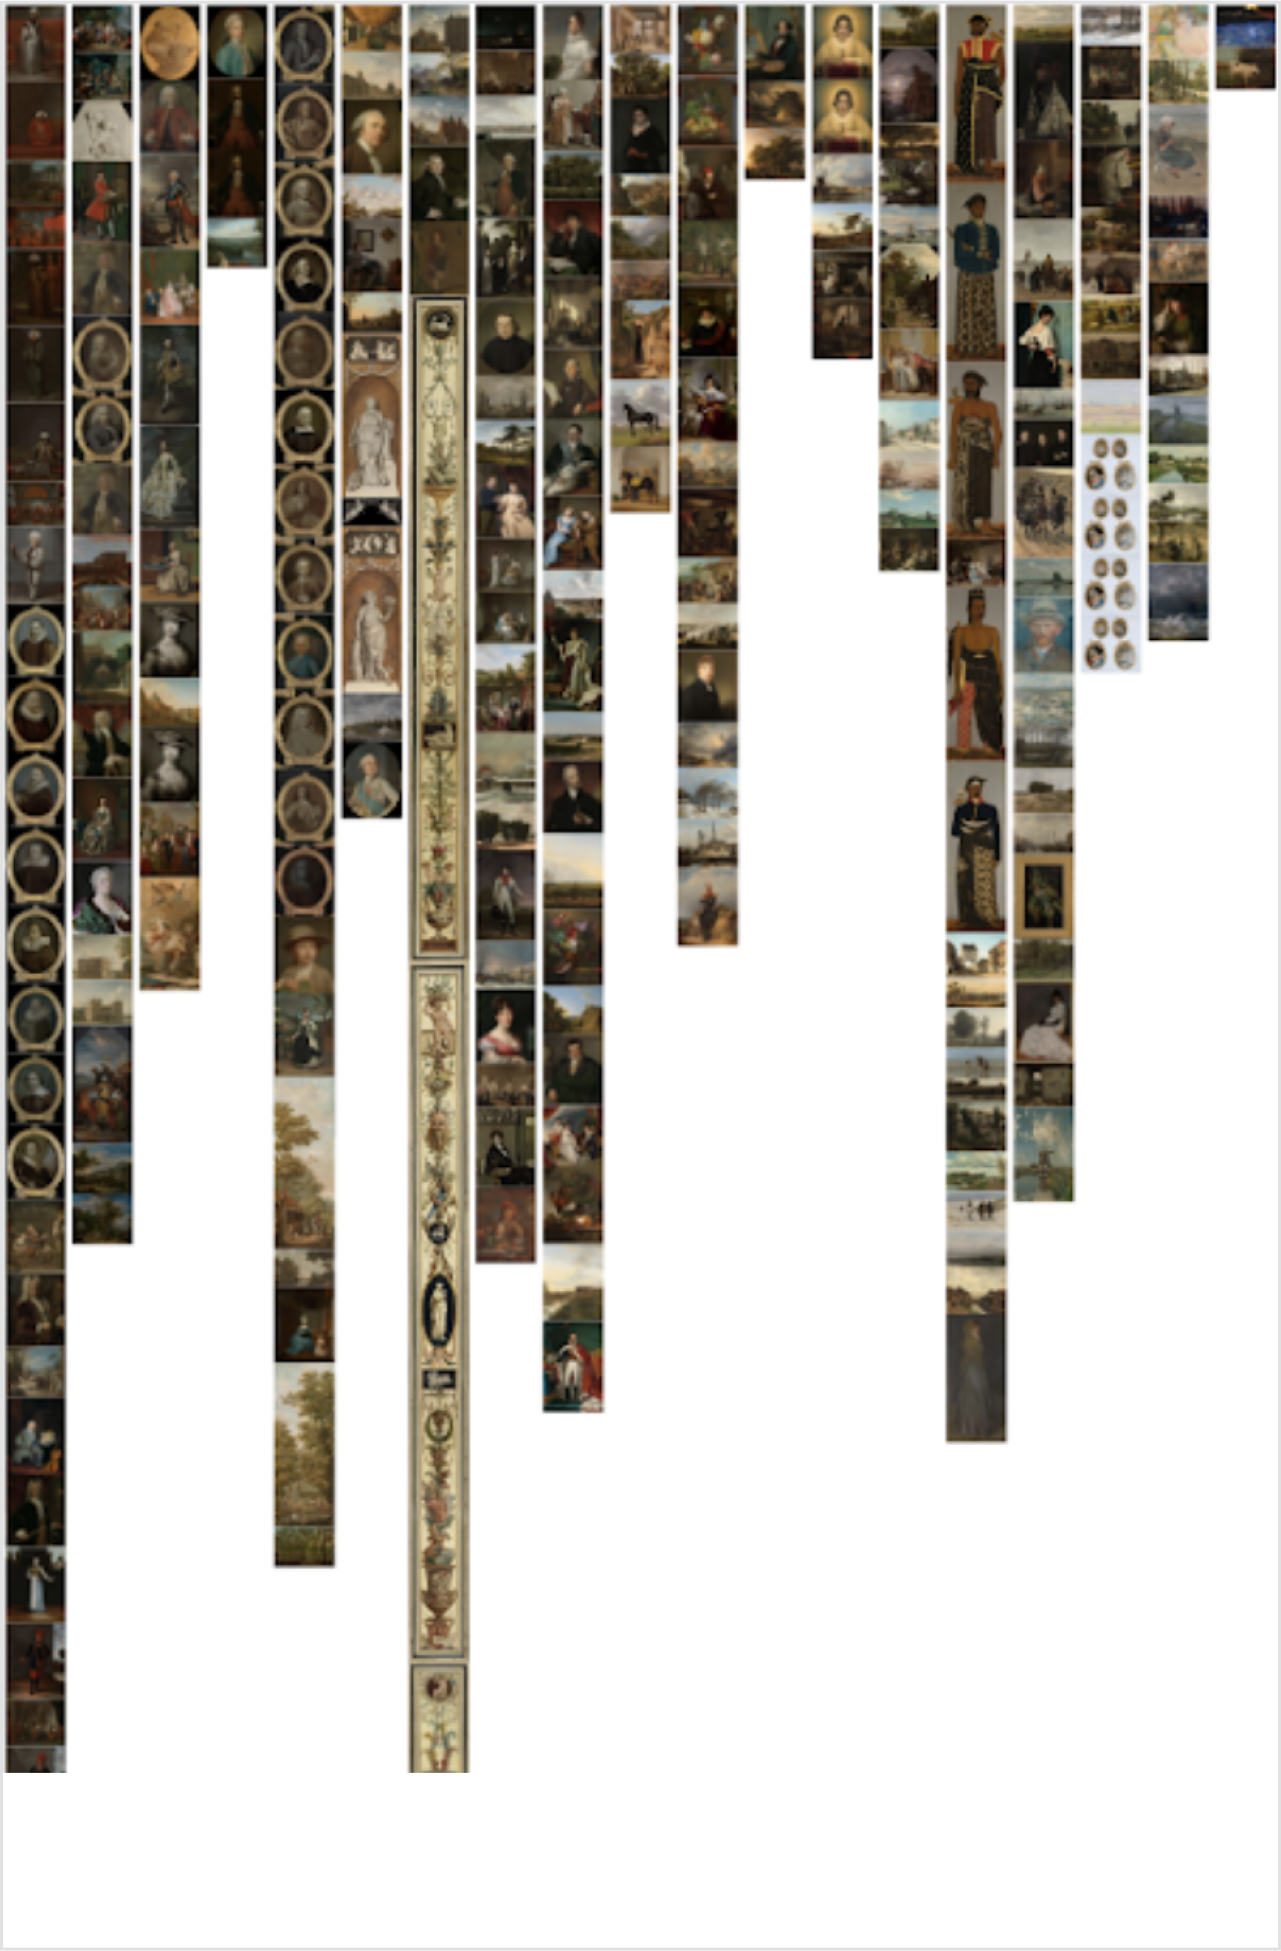 Paintings displayed roughly in our internal interface from a Rijksmuseum API query (2 of 2 images)